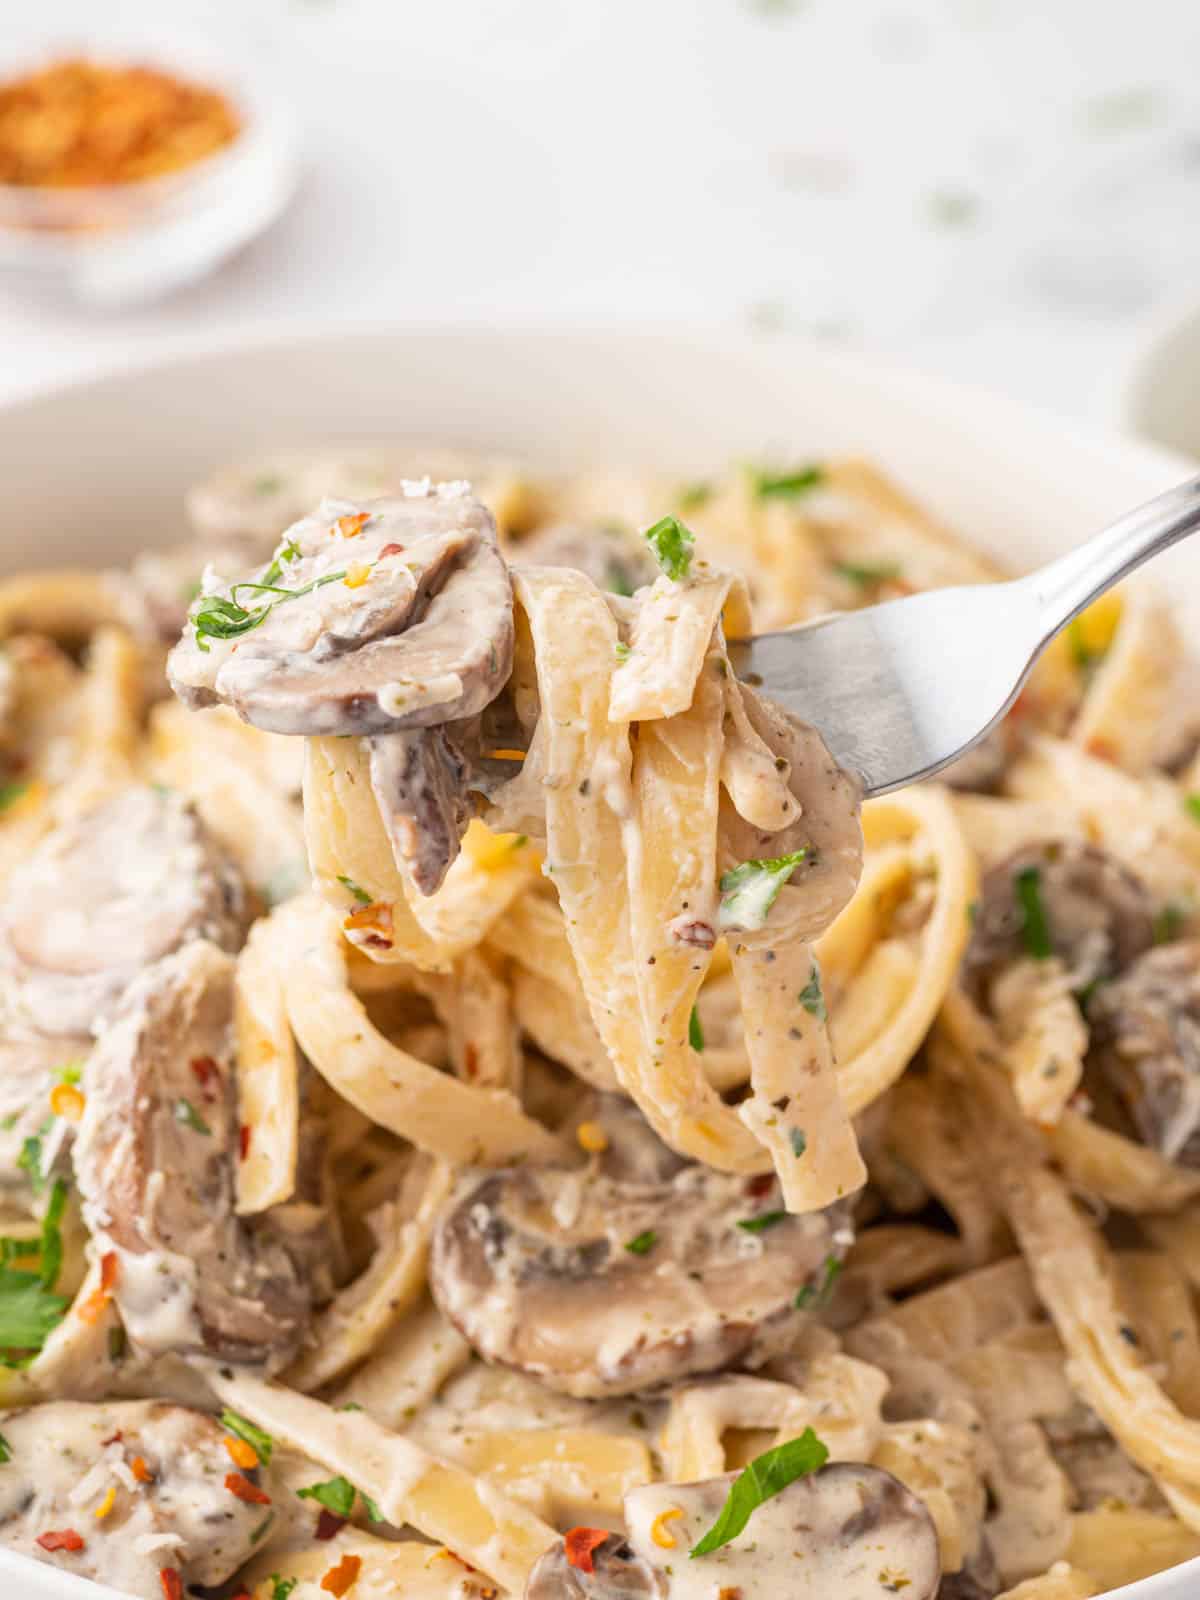 A fork picks up a scoop of fettuccine with mushroom sauce.